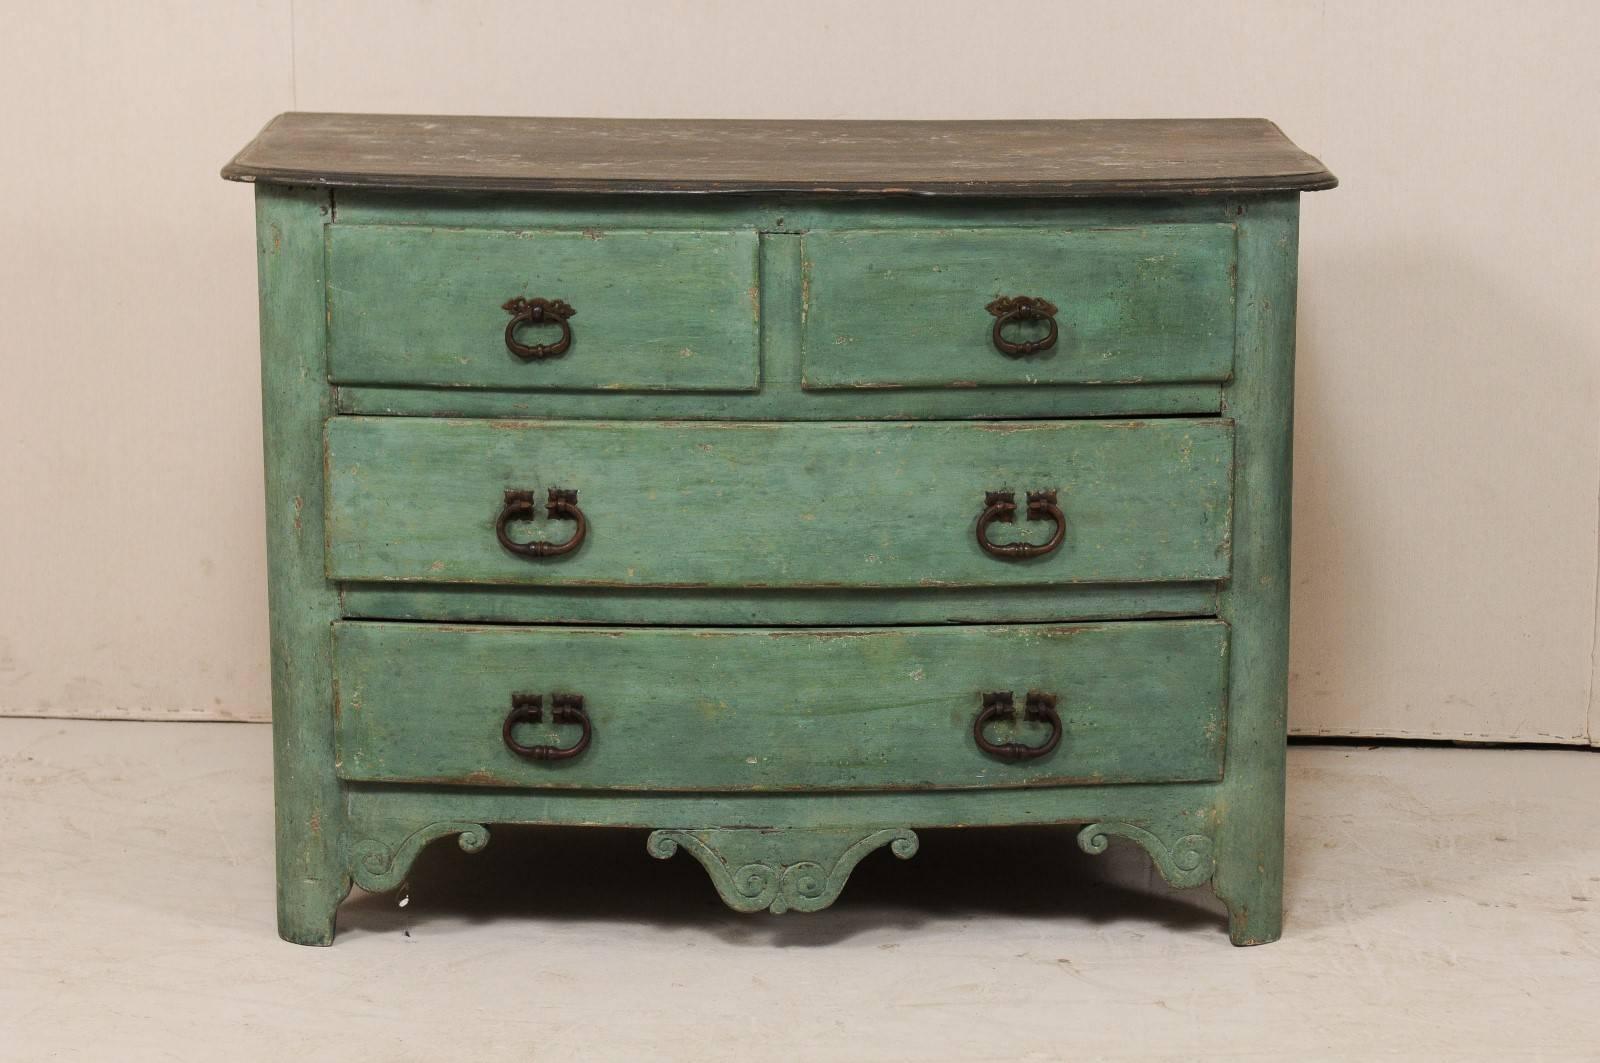 A French 18th century four-drawer painted wood chest. This antique French chest is good sized and has a slightly bowed front and slightly overhung top, set above two half drawers over two full drawers, each with nice old chunky iron hardware. Each